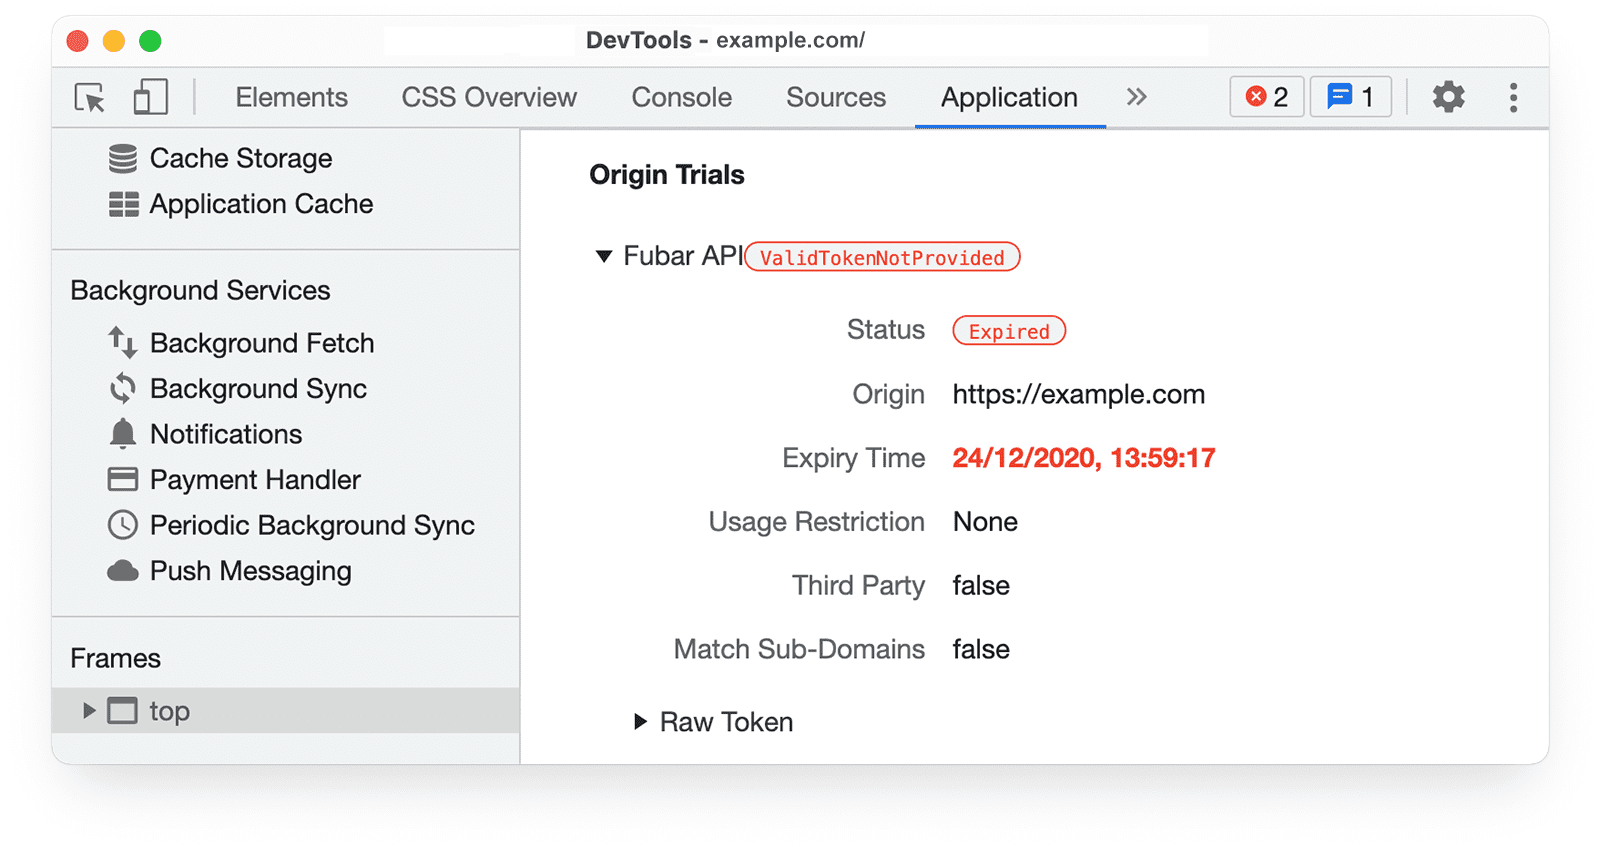 Chrome DevTools 
origin trials information in the Application panel showing ValidTokenNotProvided and Status Expired